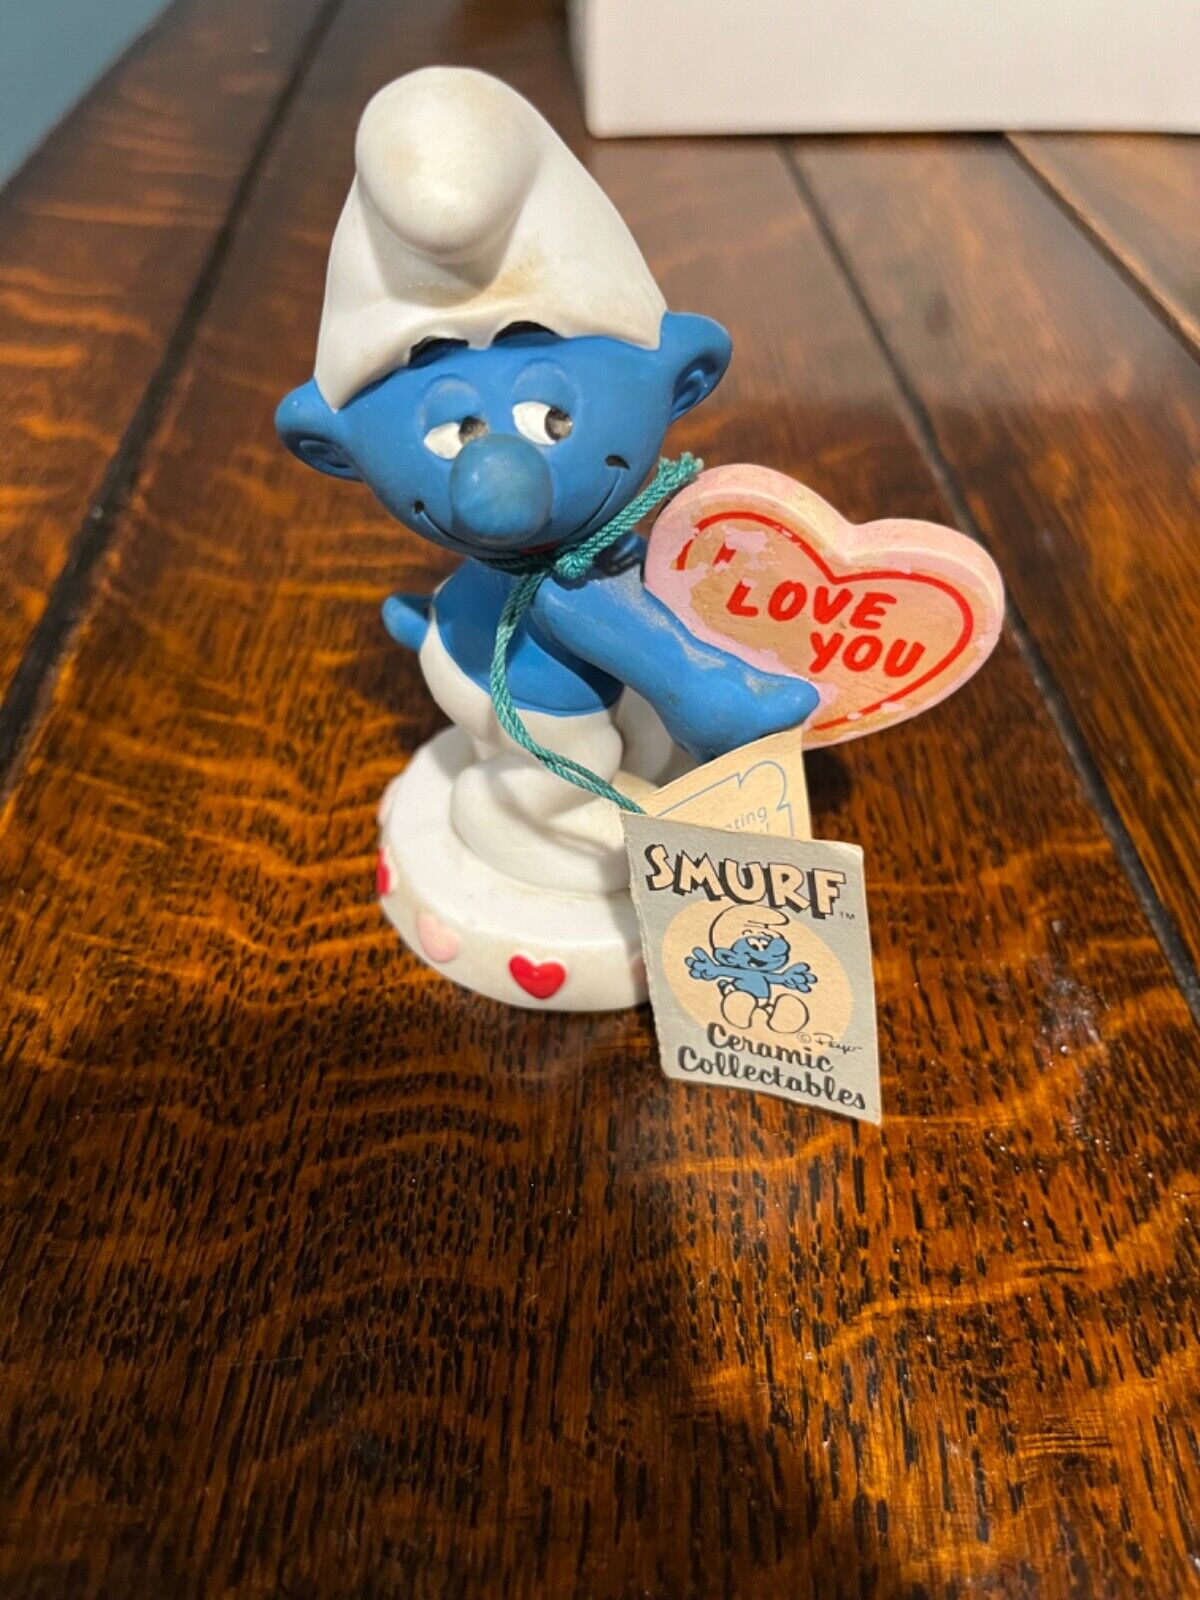 Smurf Ceramic Collectible- I love you